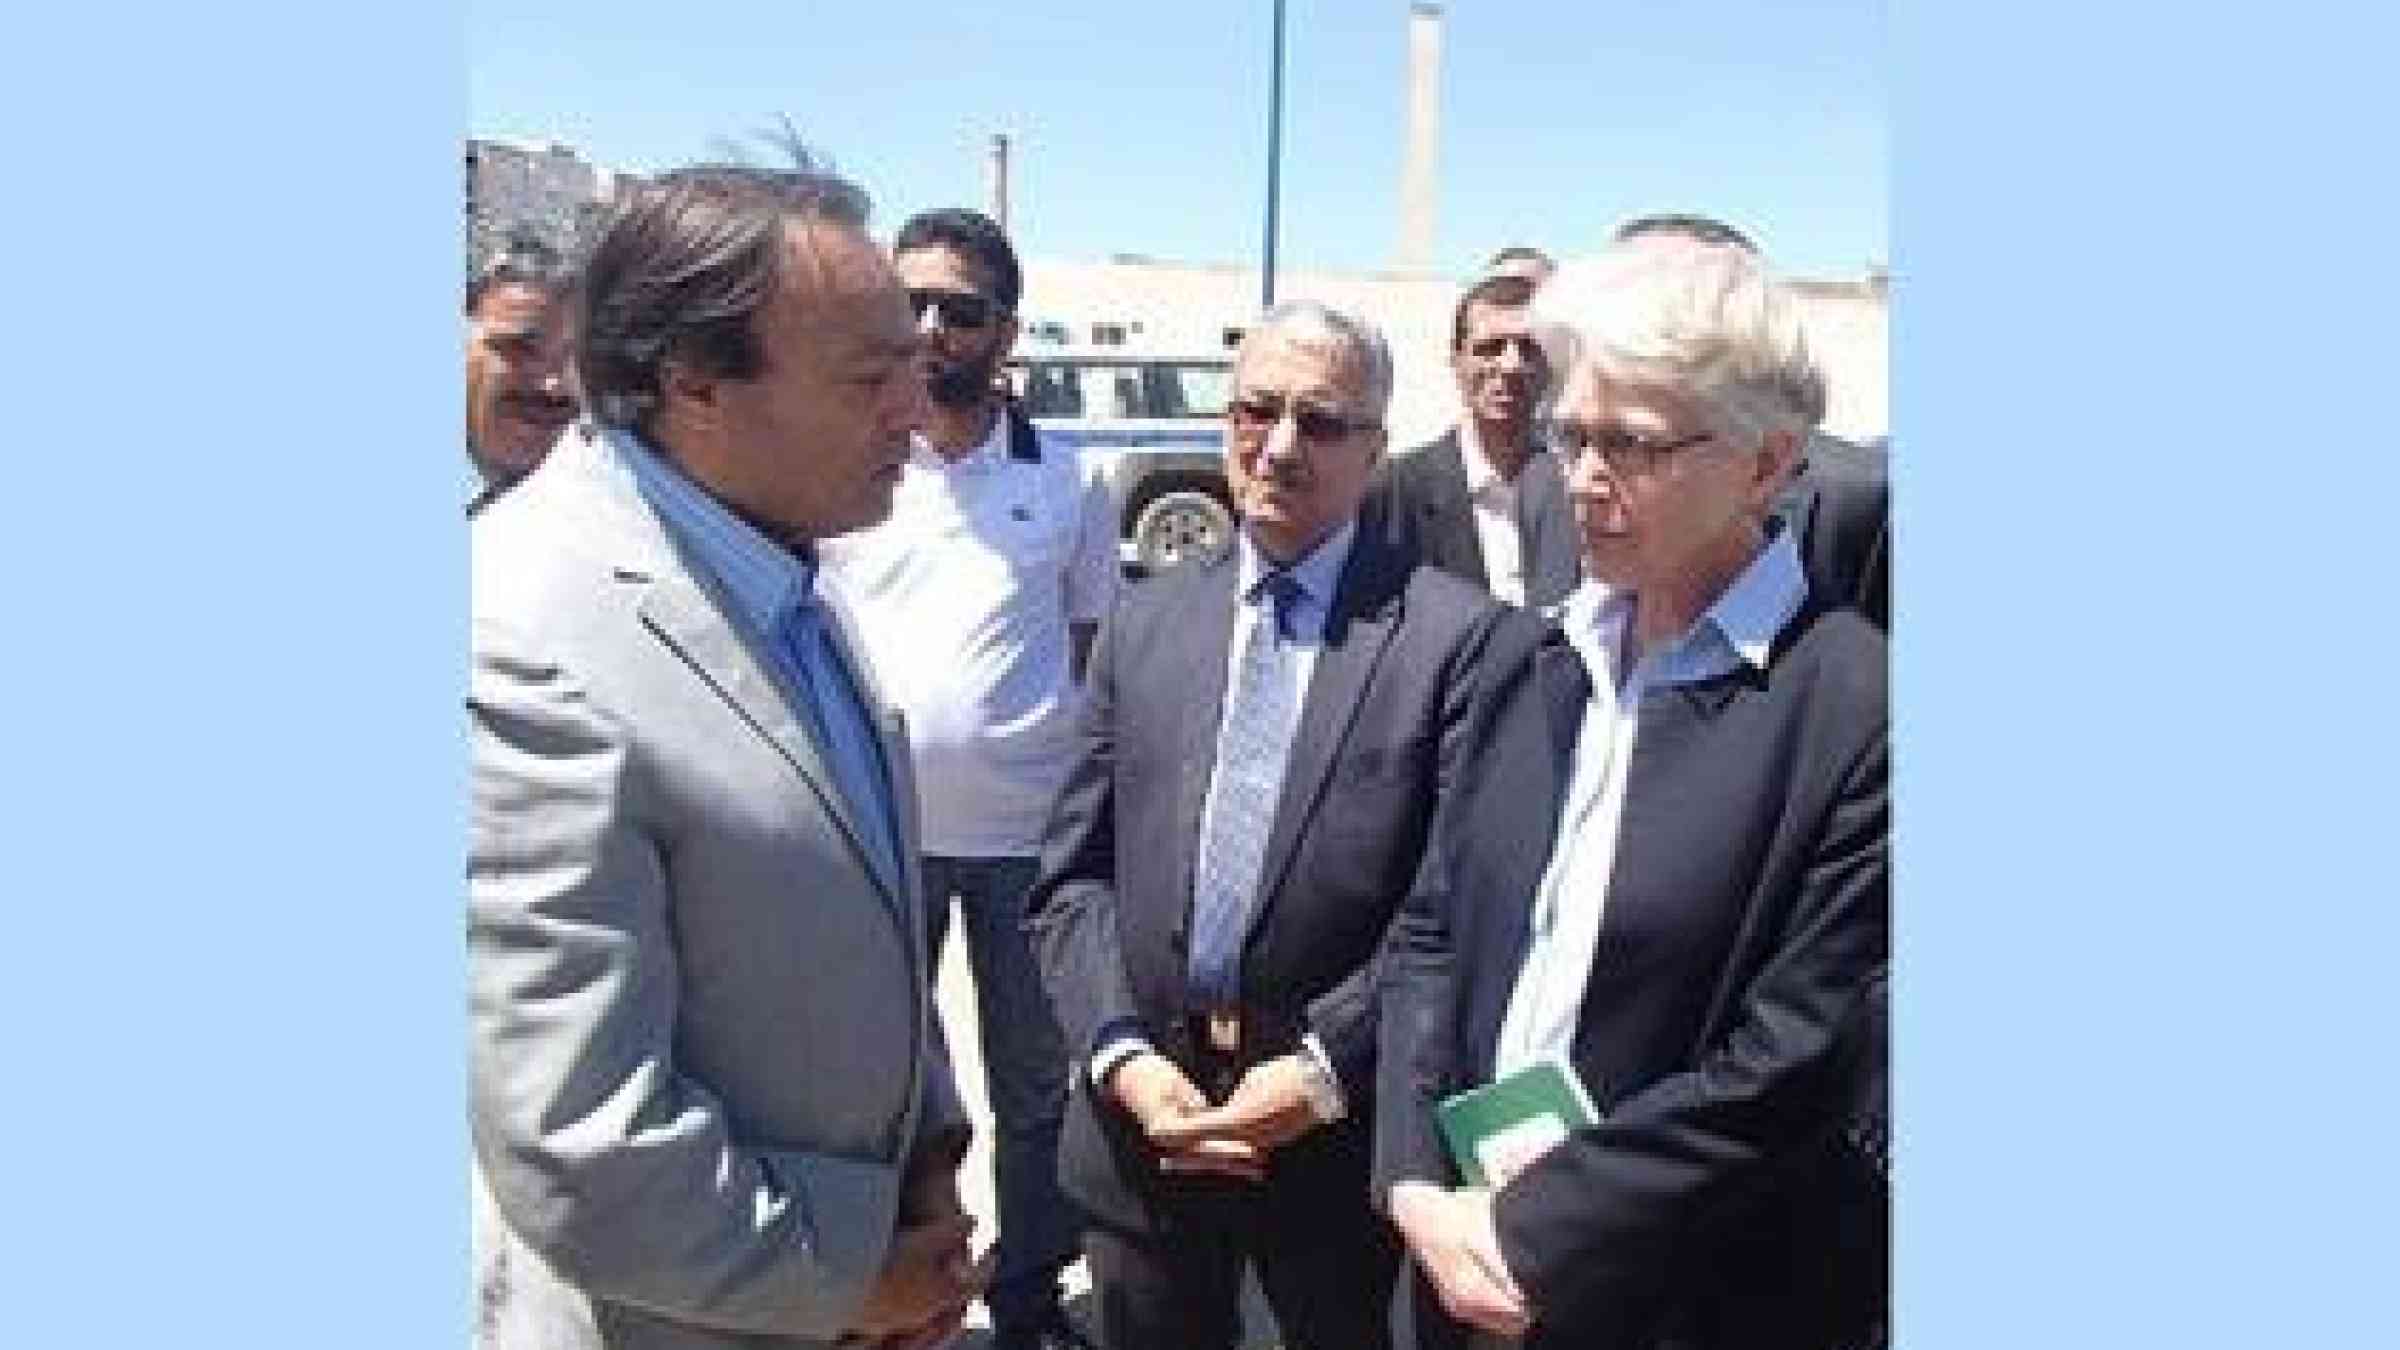 Ms. Margareta Wahlström, head of UNISDR (right), and Mr. Tahar Melizi, Algeria's National Delegate for Major Risks (centre), listen as a local official (left) in the Algerian city of Boumerdès details the community's recovery from the 2003 earthquake (Photo: UNISDR)